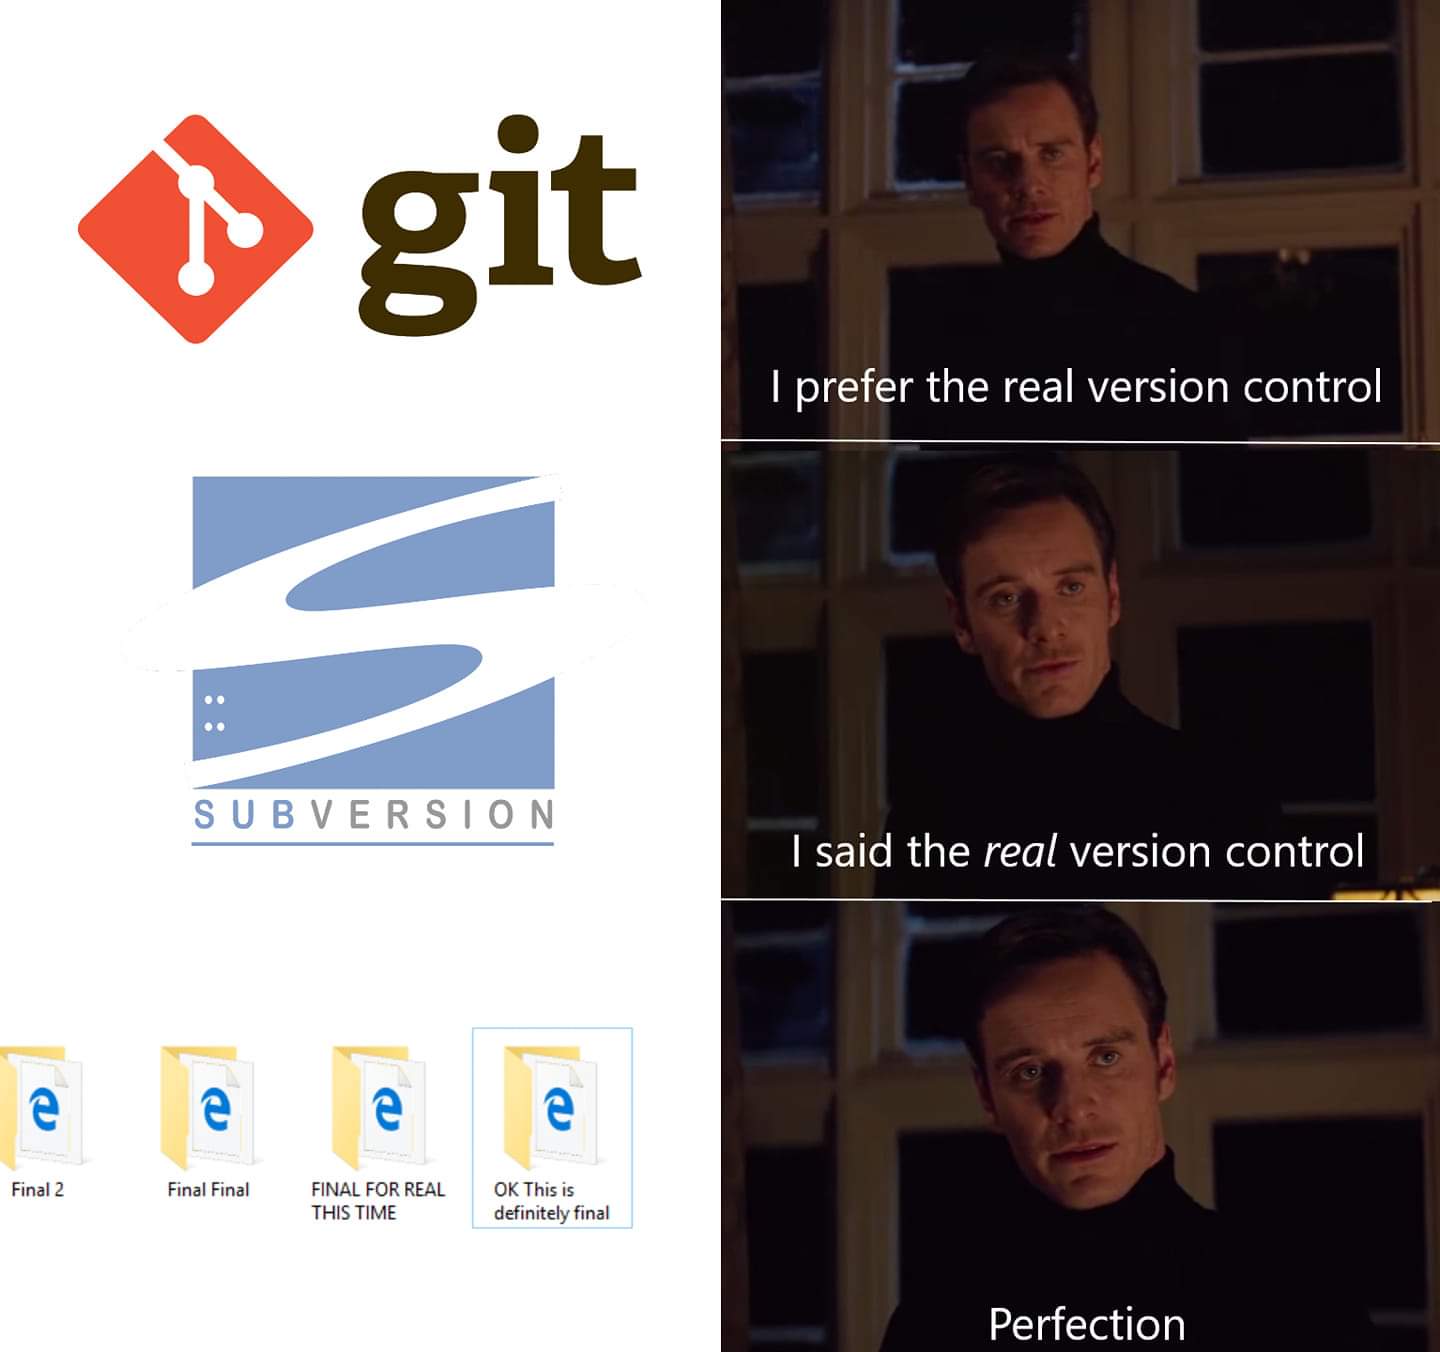 the_real_version_control.jpg